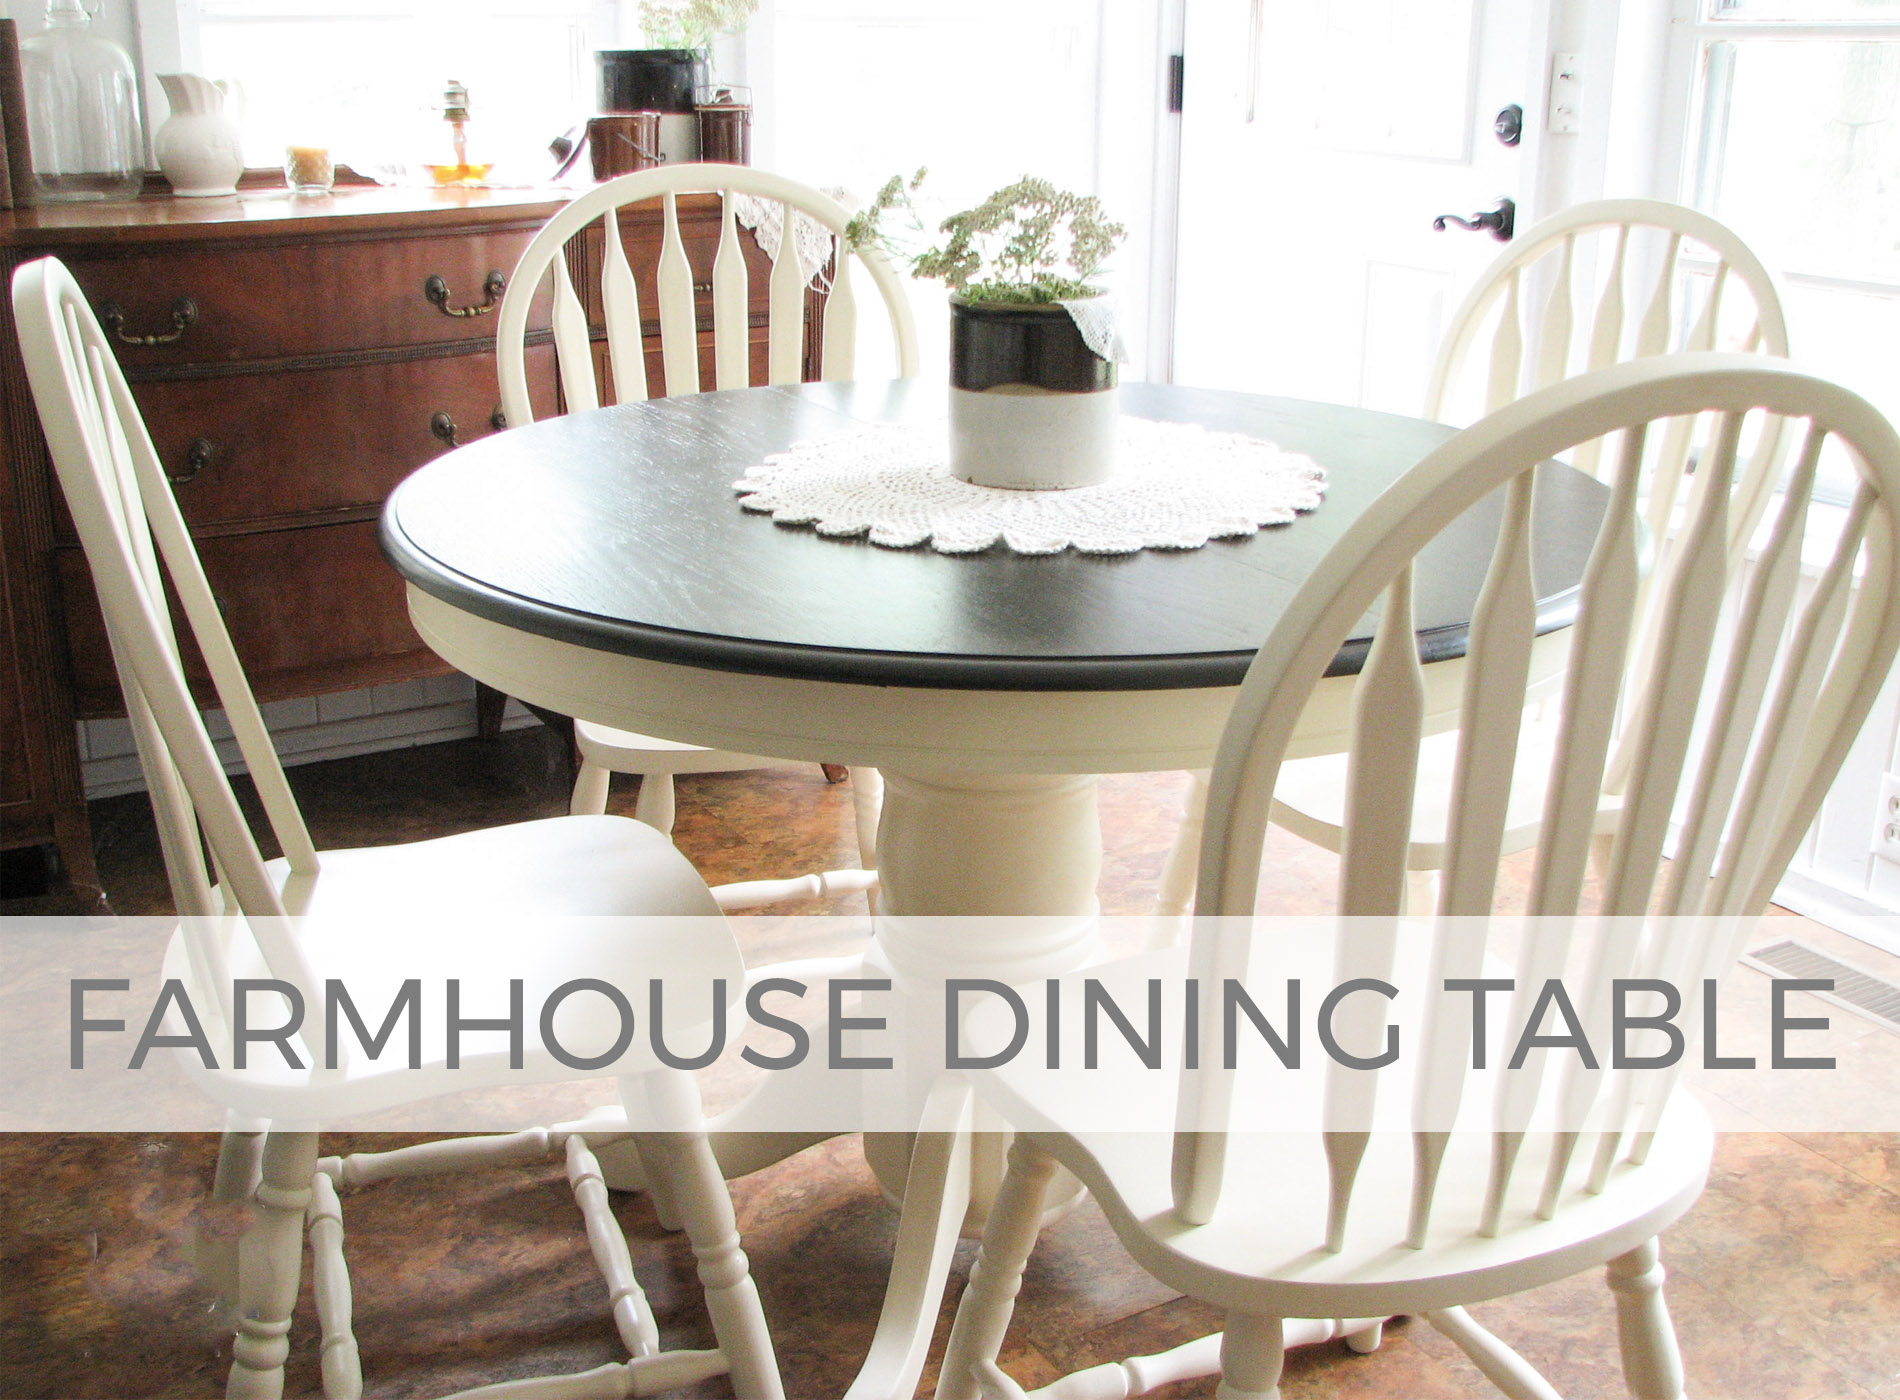 Farmhouse Dining Table Makeover by Larissa of Prodigal Pieces | prodigalpieces.com